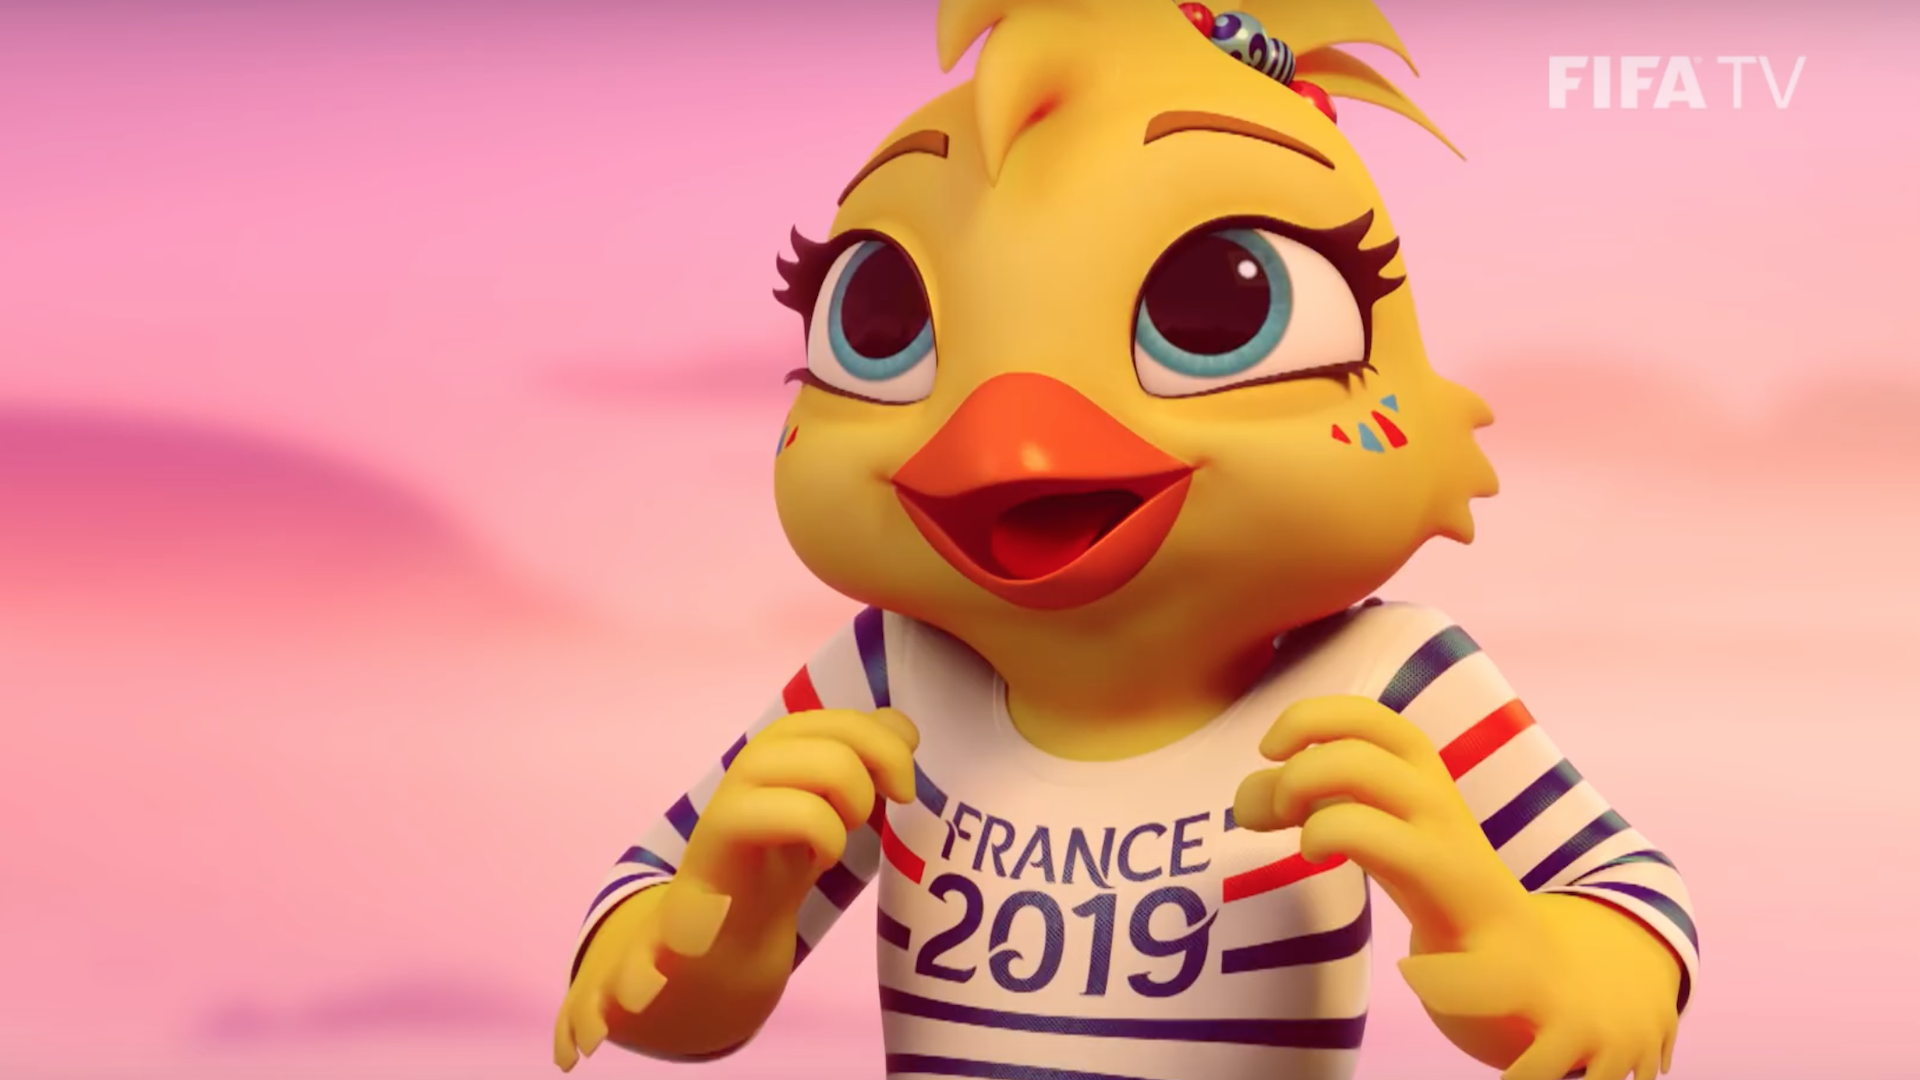 The official 2019 Women's World Cup mascot